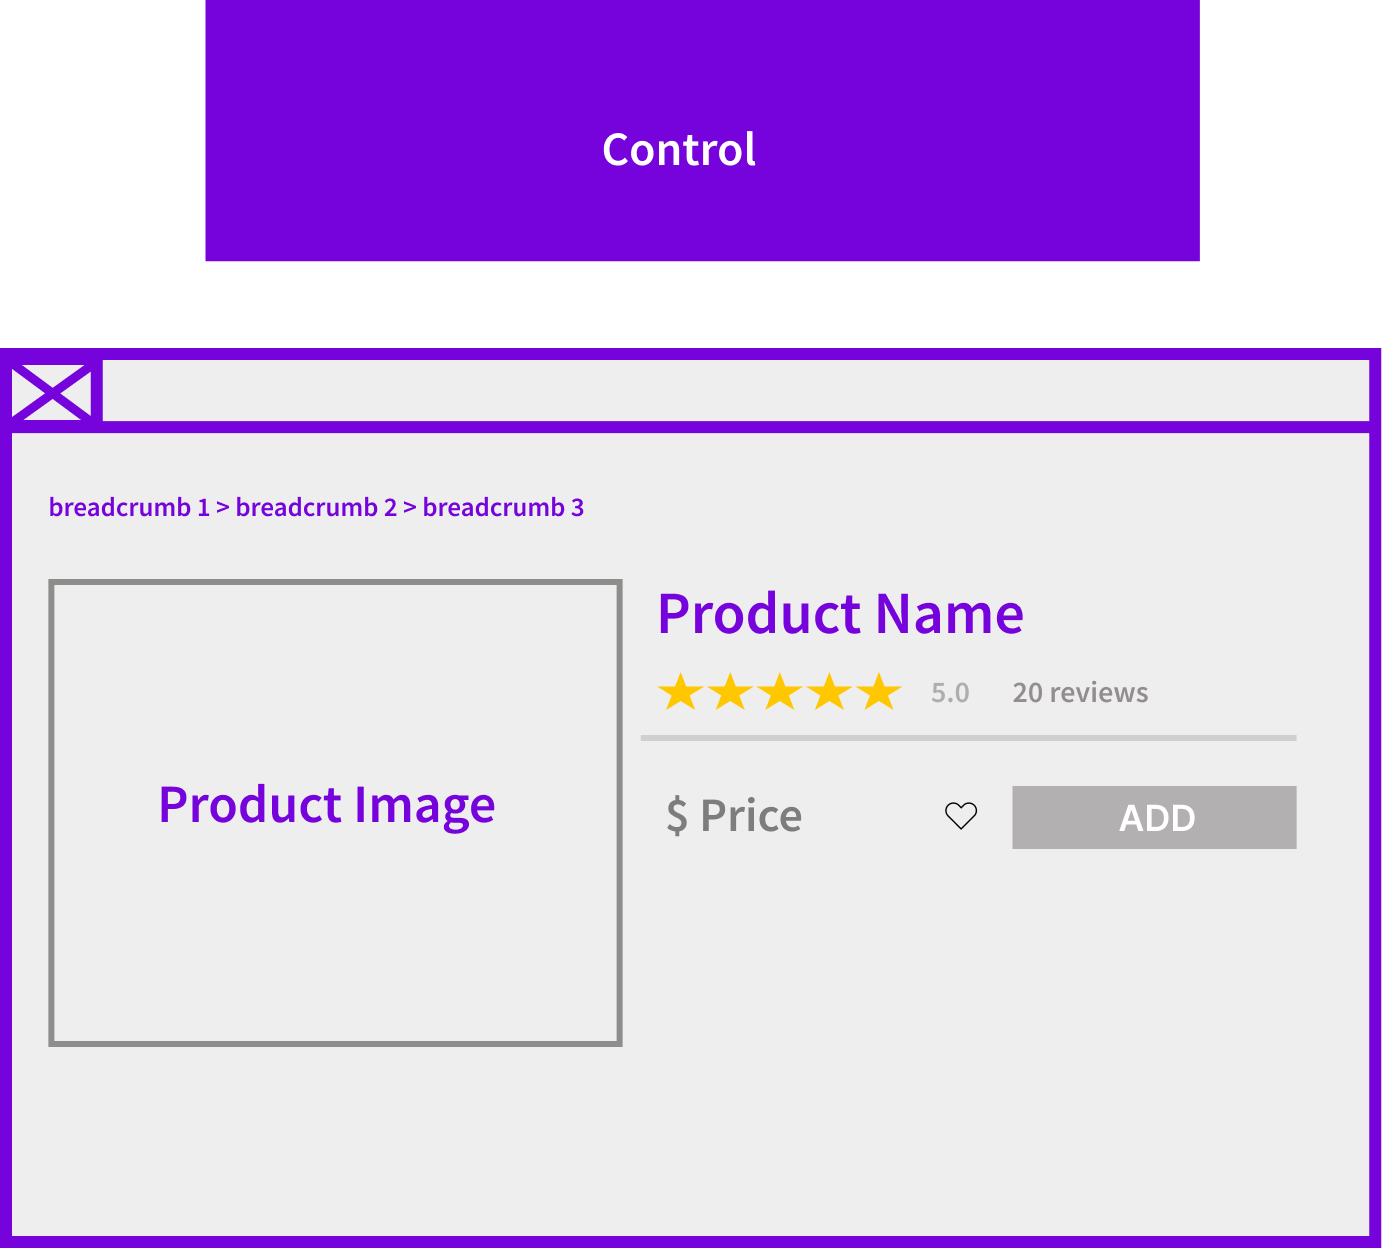 wireframe of control page